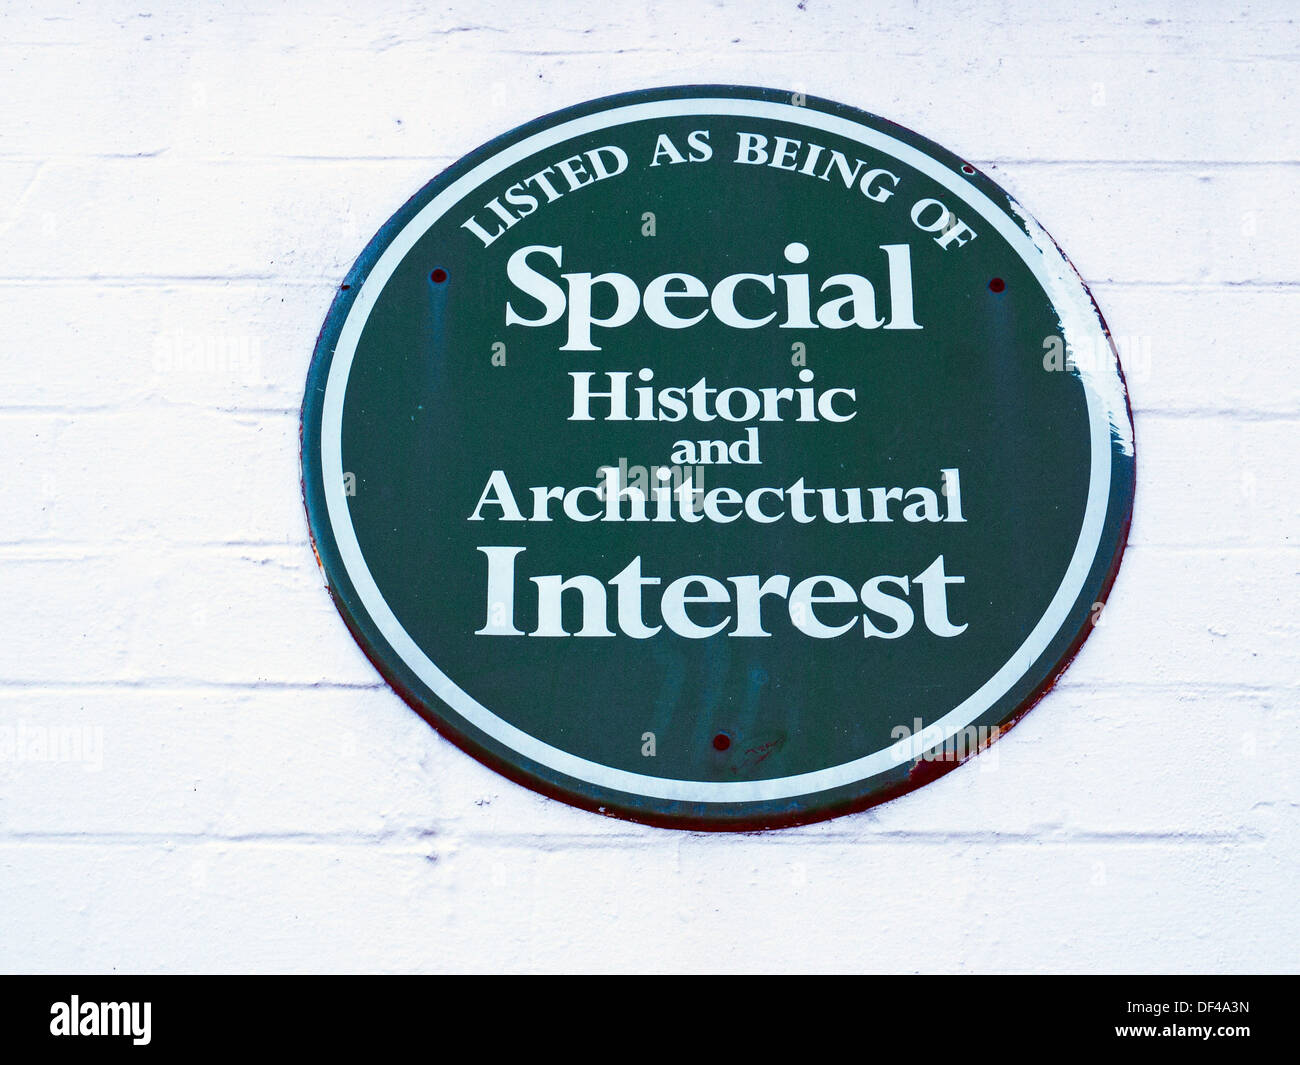 Listed as being of special historic and architectural interest sign on outside wall Stock Photo